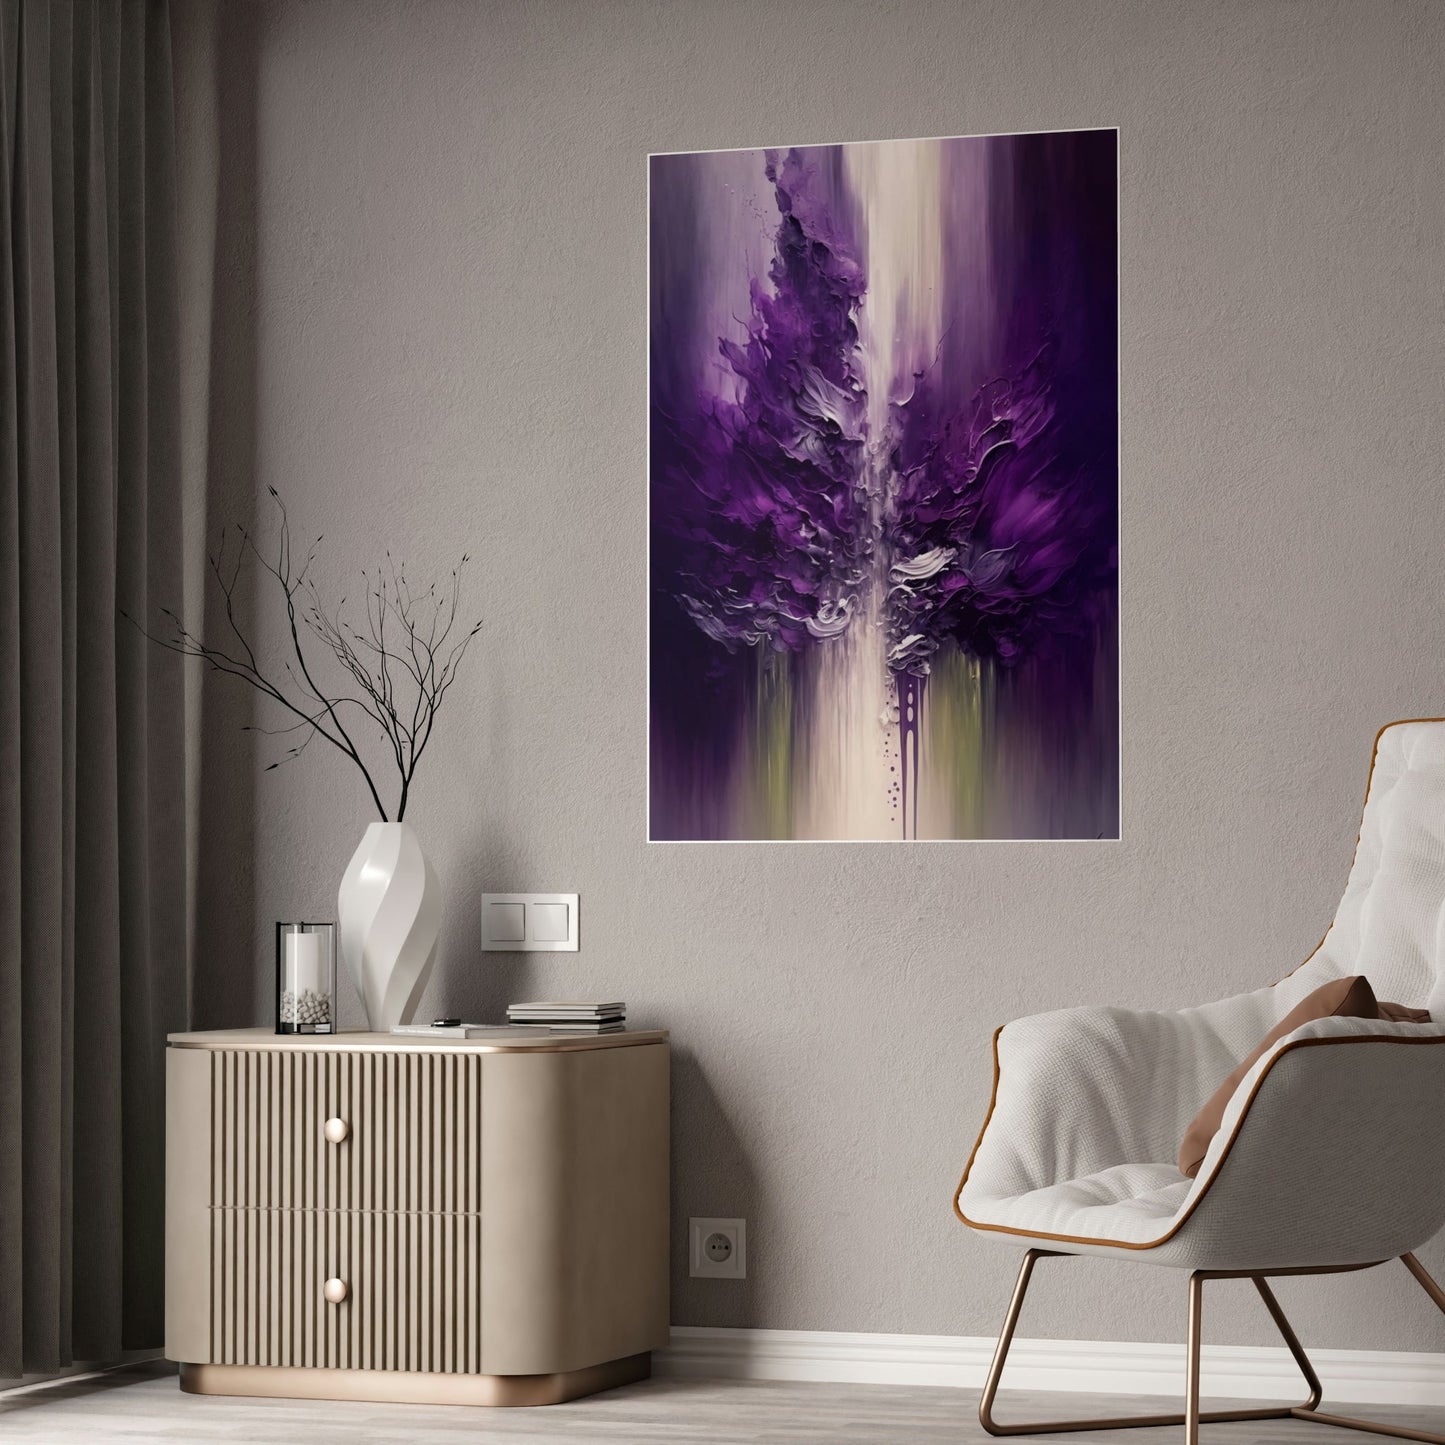 Purple Passion: Framed Poster of Abstract Art with Intense Hues on Canvas